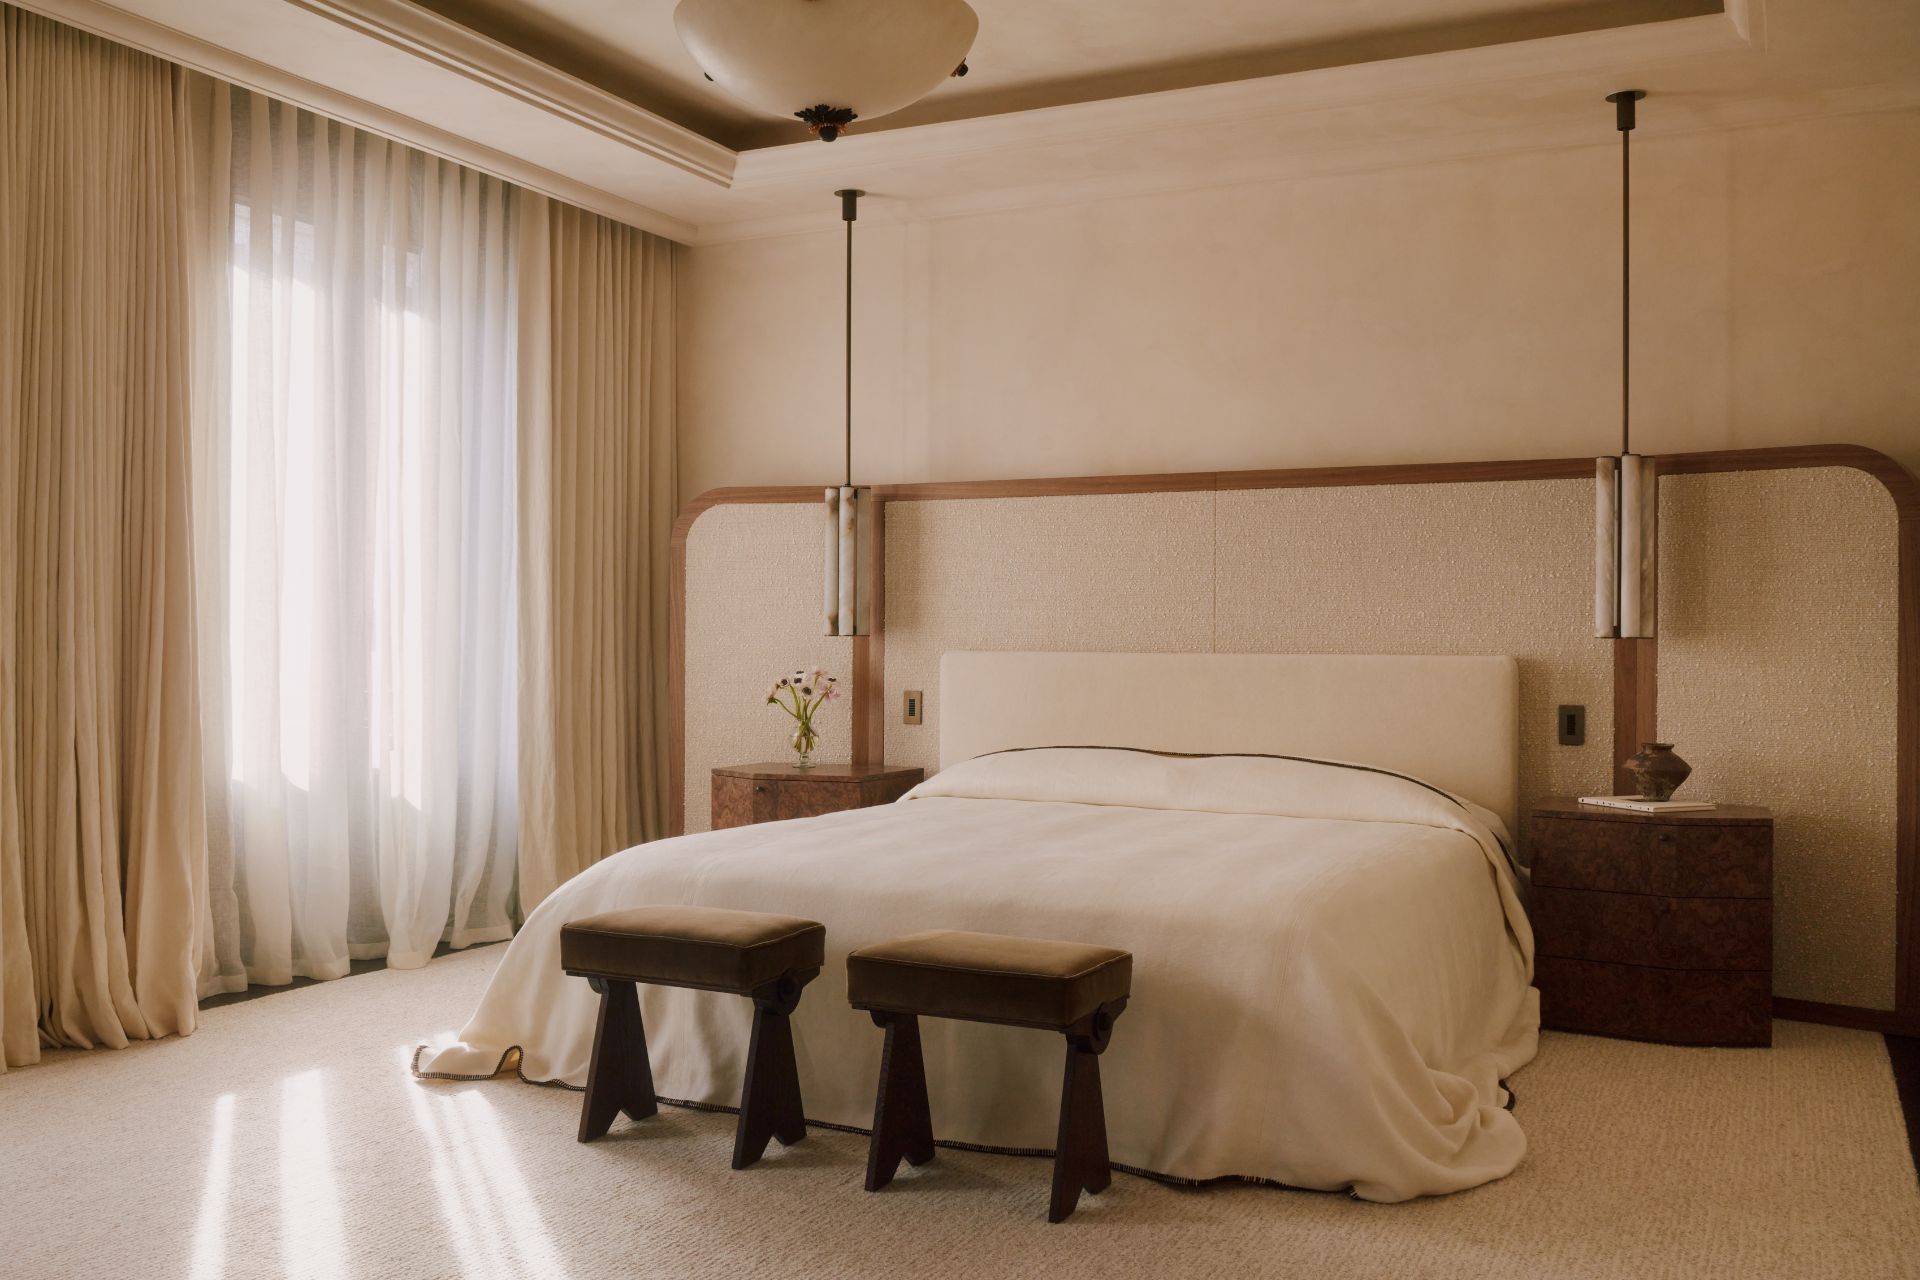 Master bedroom with white bed linen, a cream fabric headboard and two wooden stools.